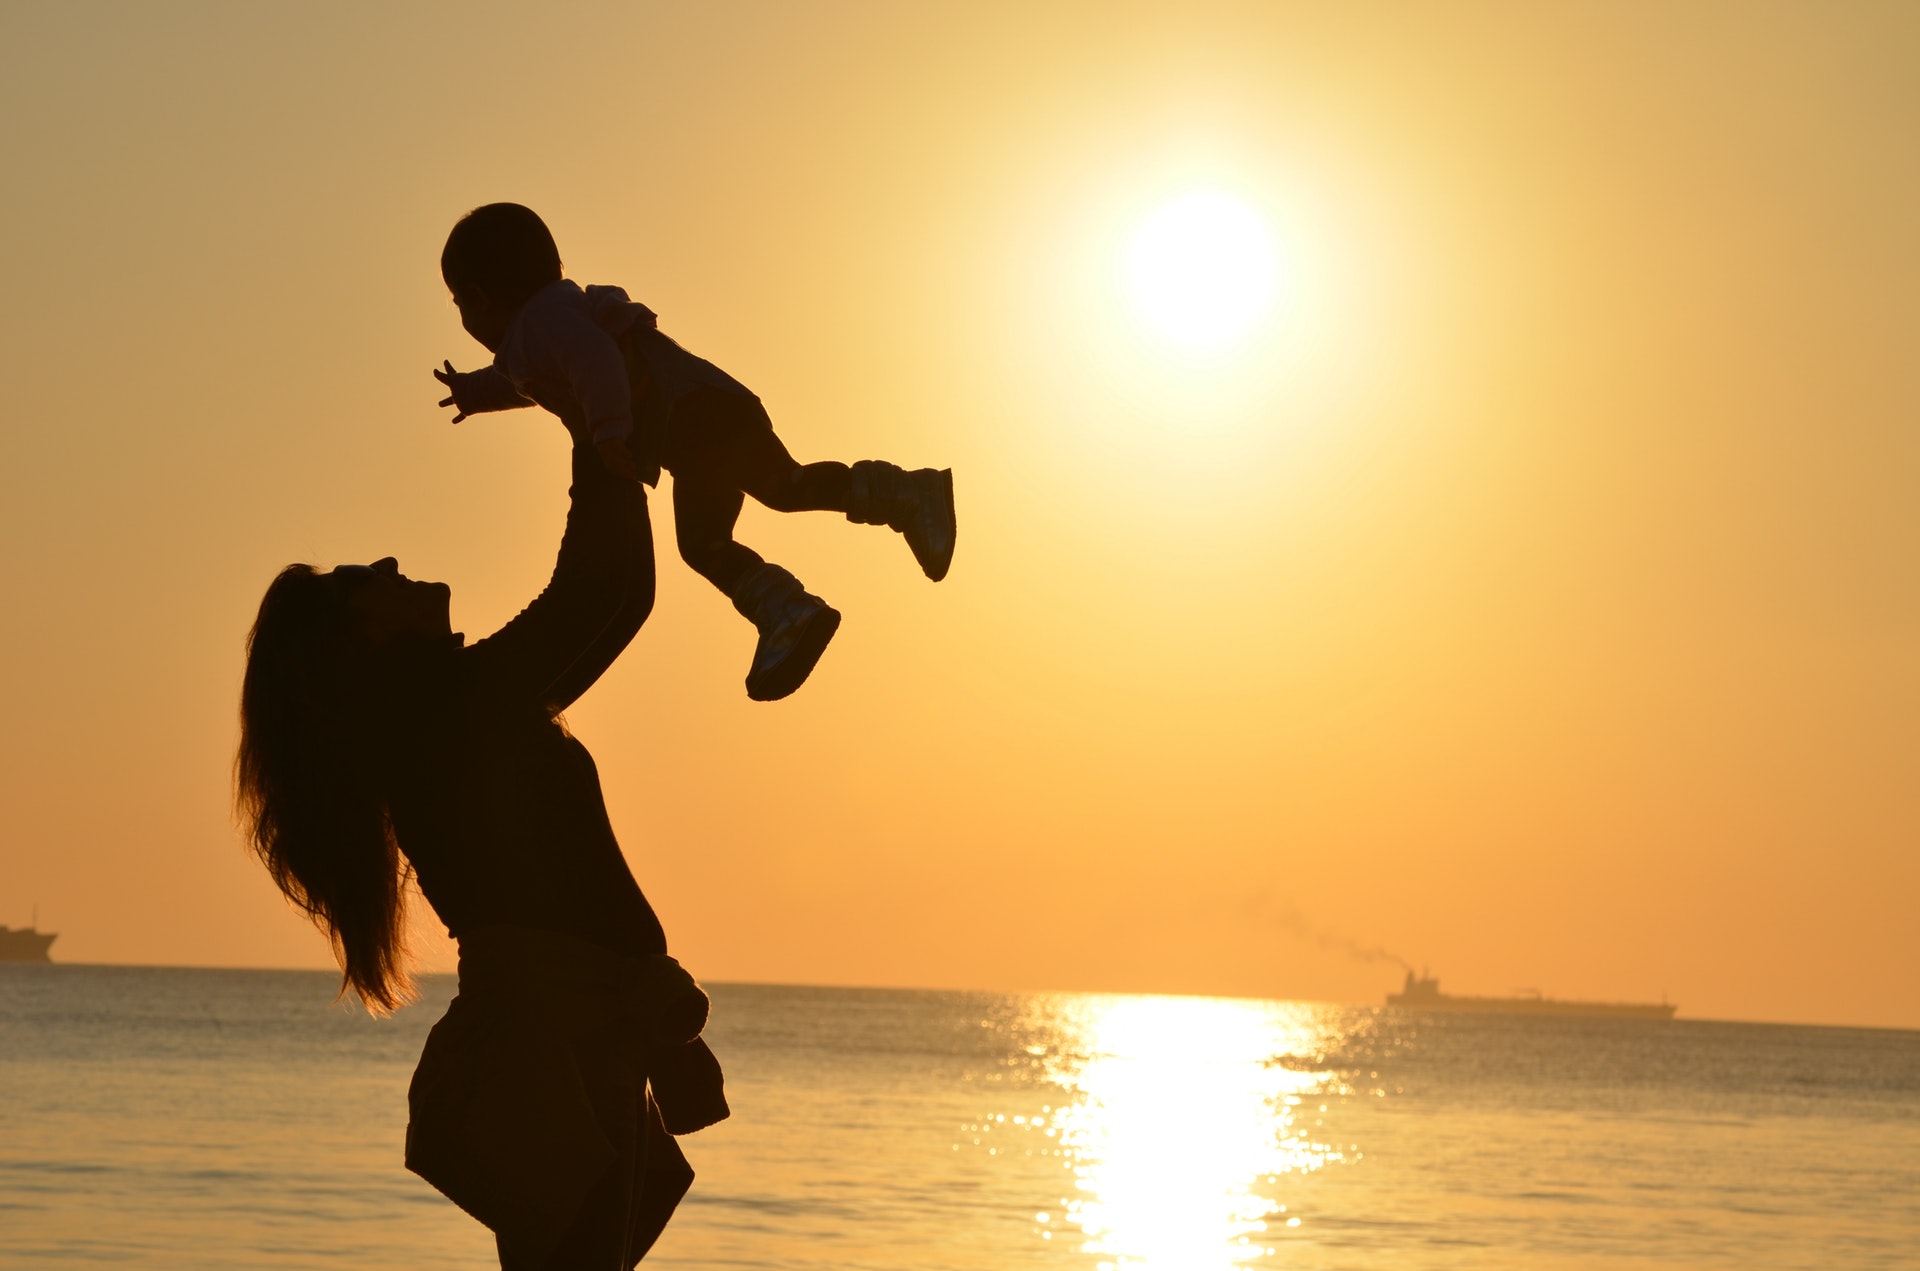 woman-carrying-baby-at-beach-during-sunset-51953.jpg